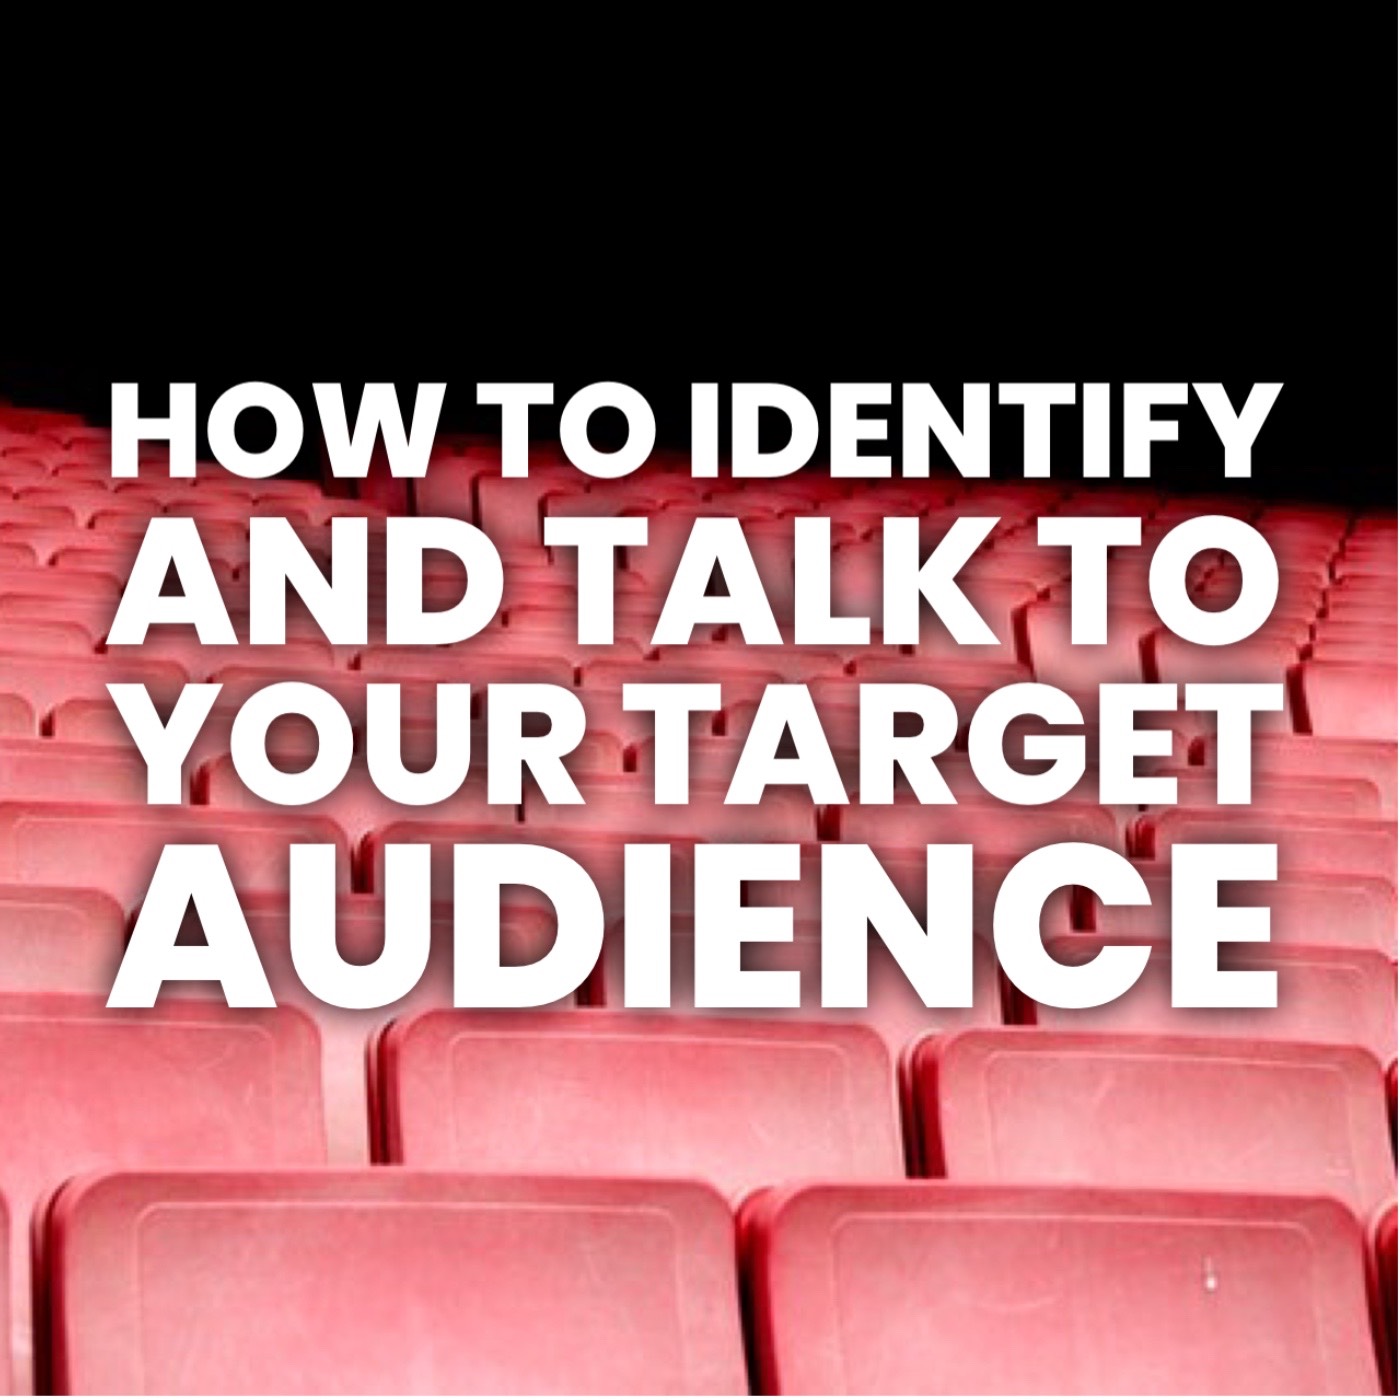 How to identify and talk to your target audience